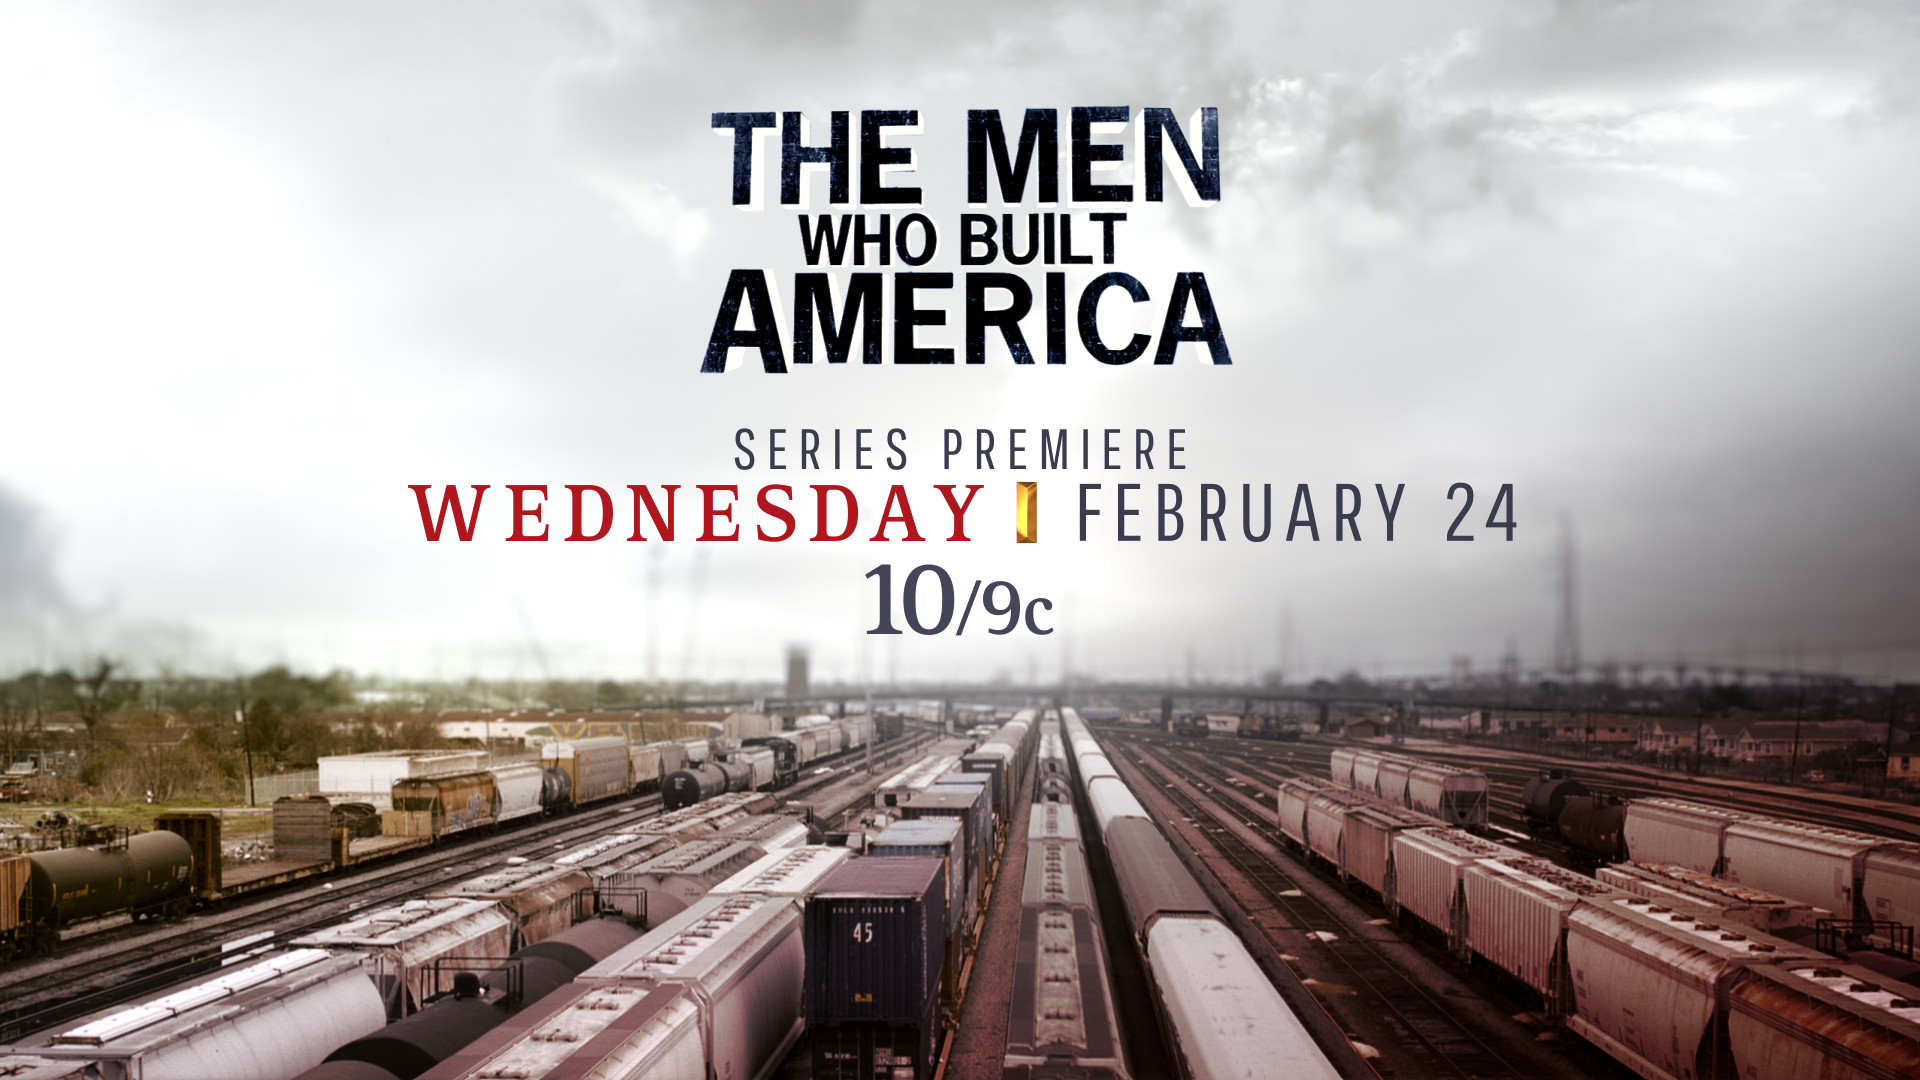 History Channel Branding tune in design with a live action background of a train yard